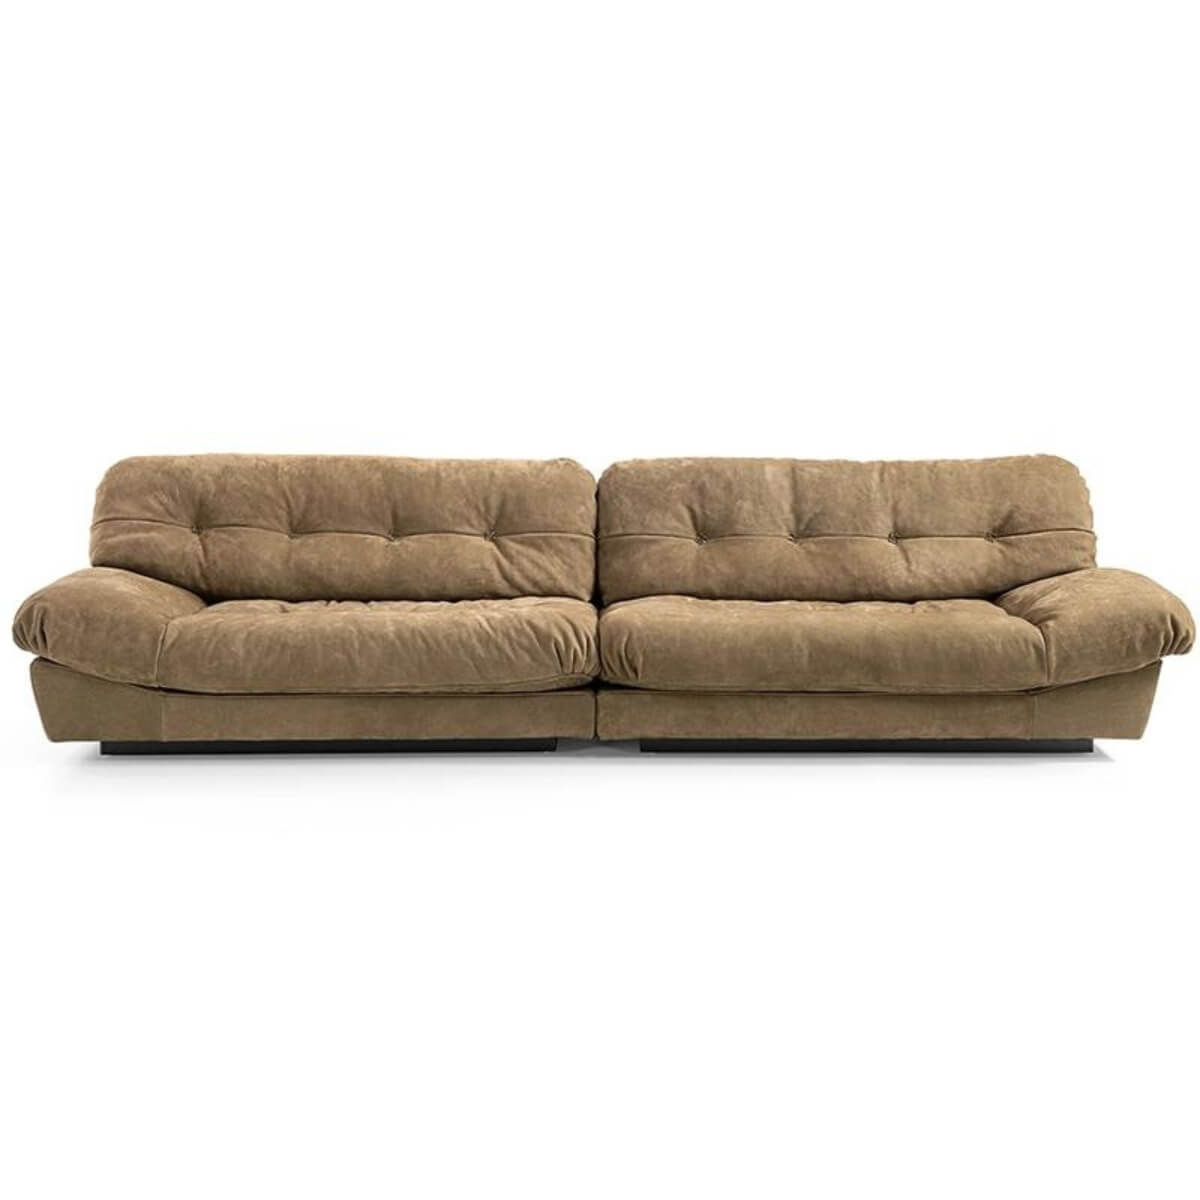 ChromaCraft Matte fabric Sofa - The Perfect Blend of Comfort and Style